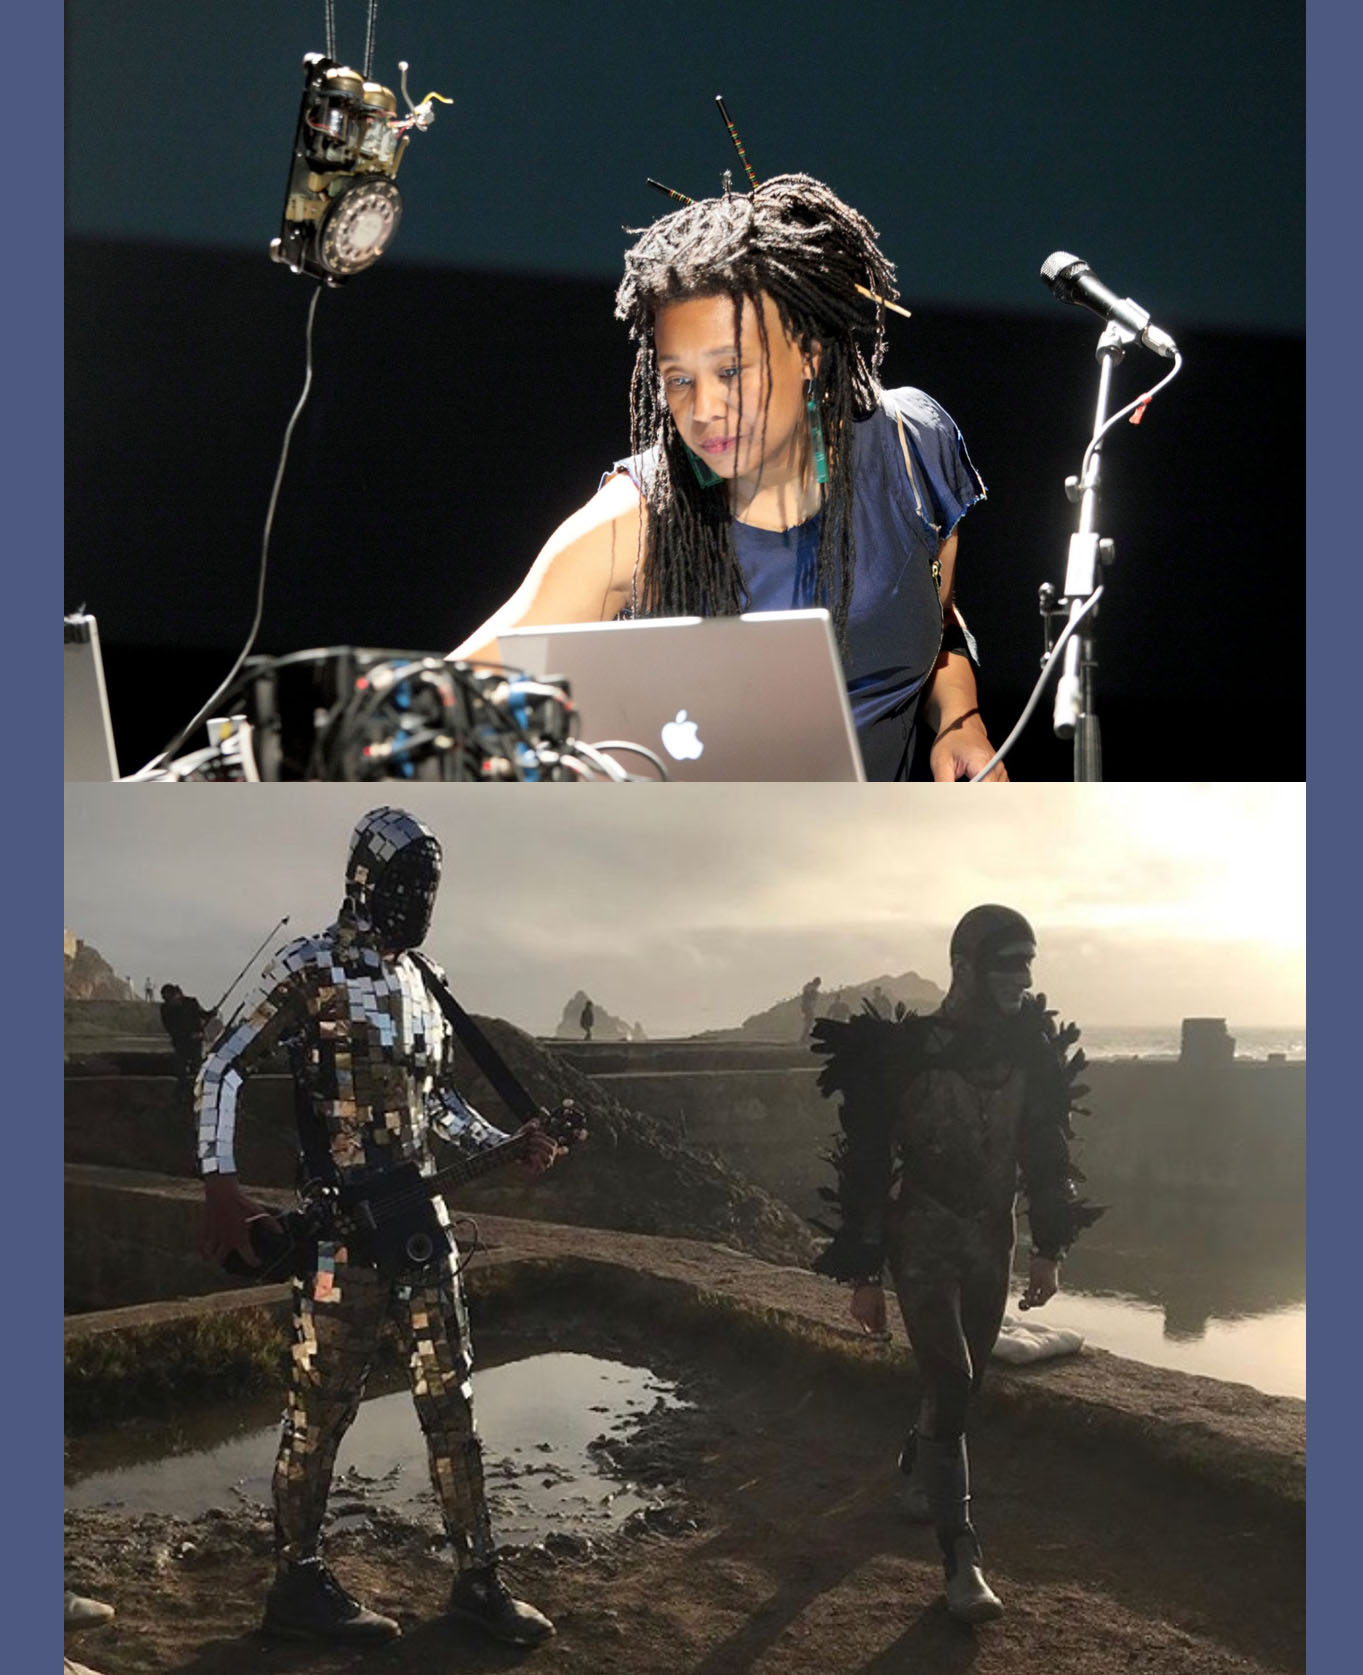 Composite photos: A musician works at a tech station; Two performers in full body futuristic costume outdoors